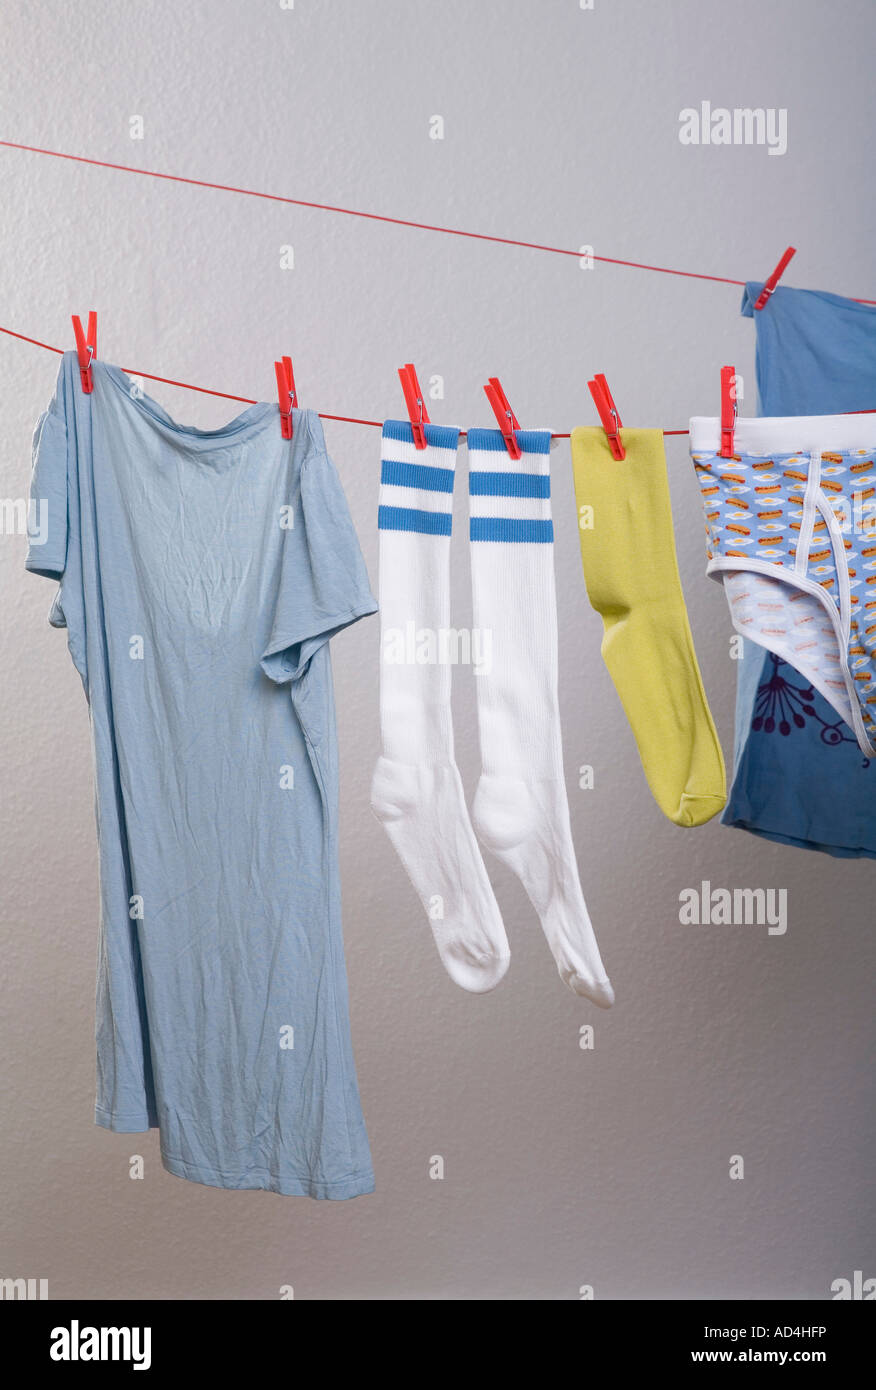 Laundry hanging on a clothes line Stock Photo